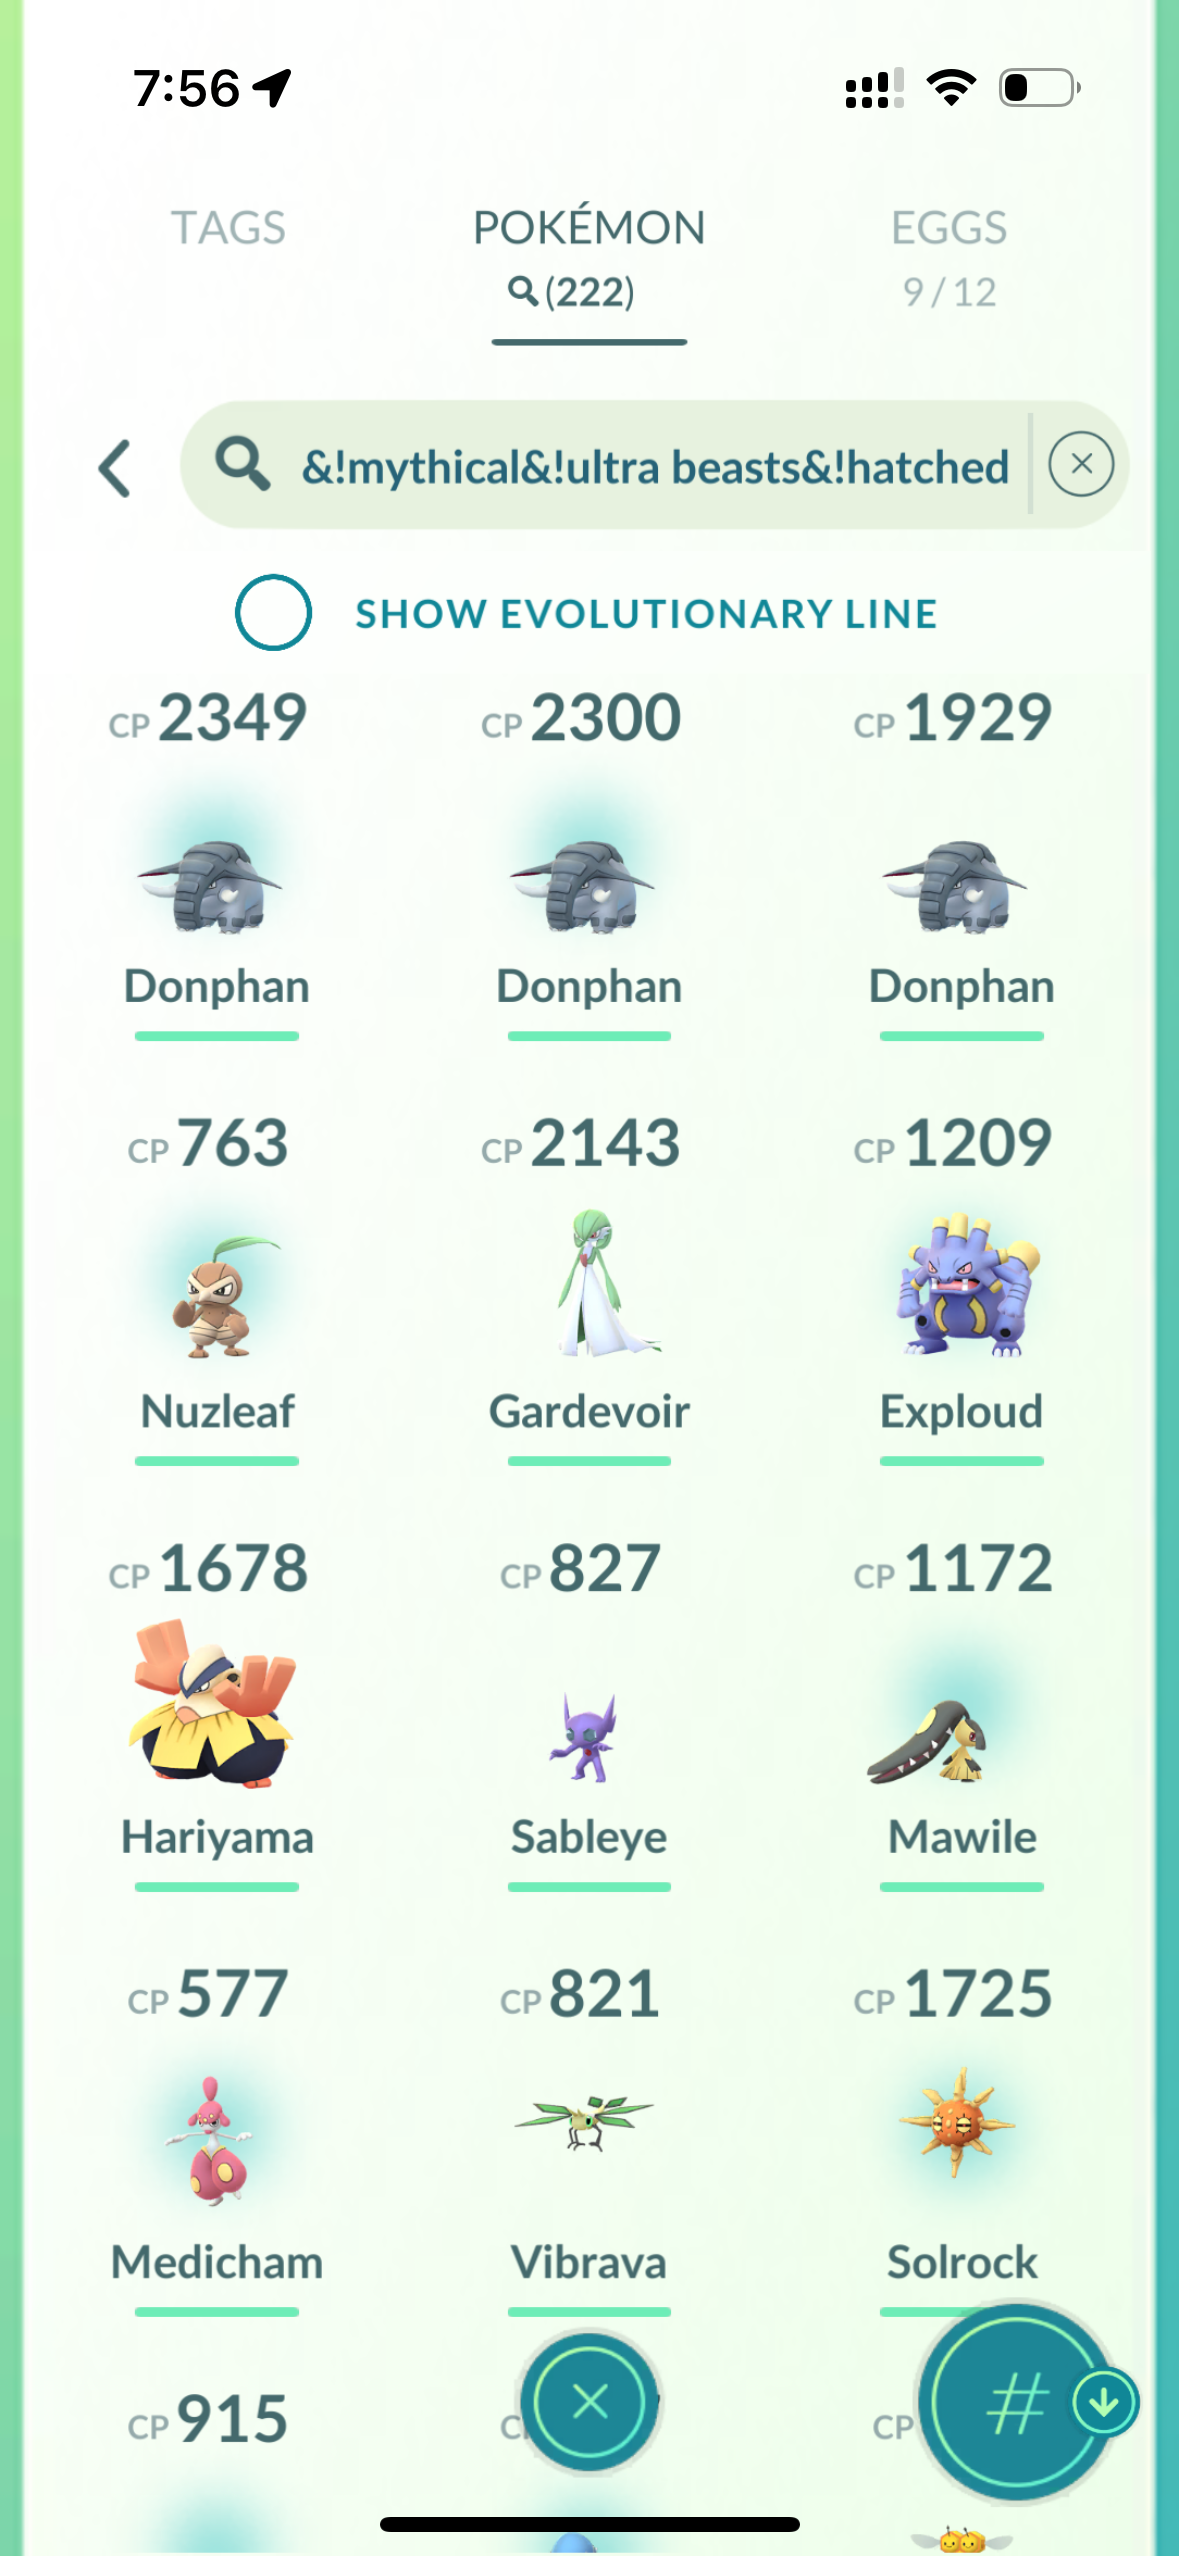 InvisibleSounds account (18 shiny/legendary)